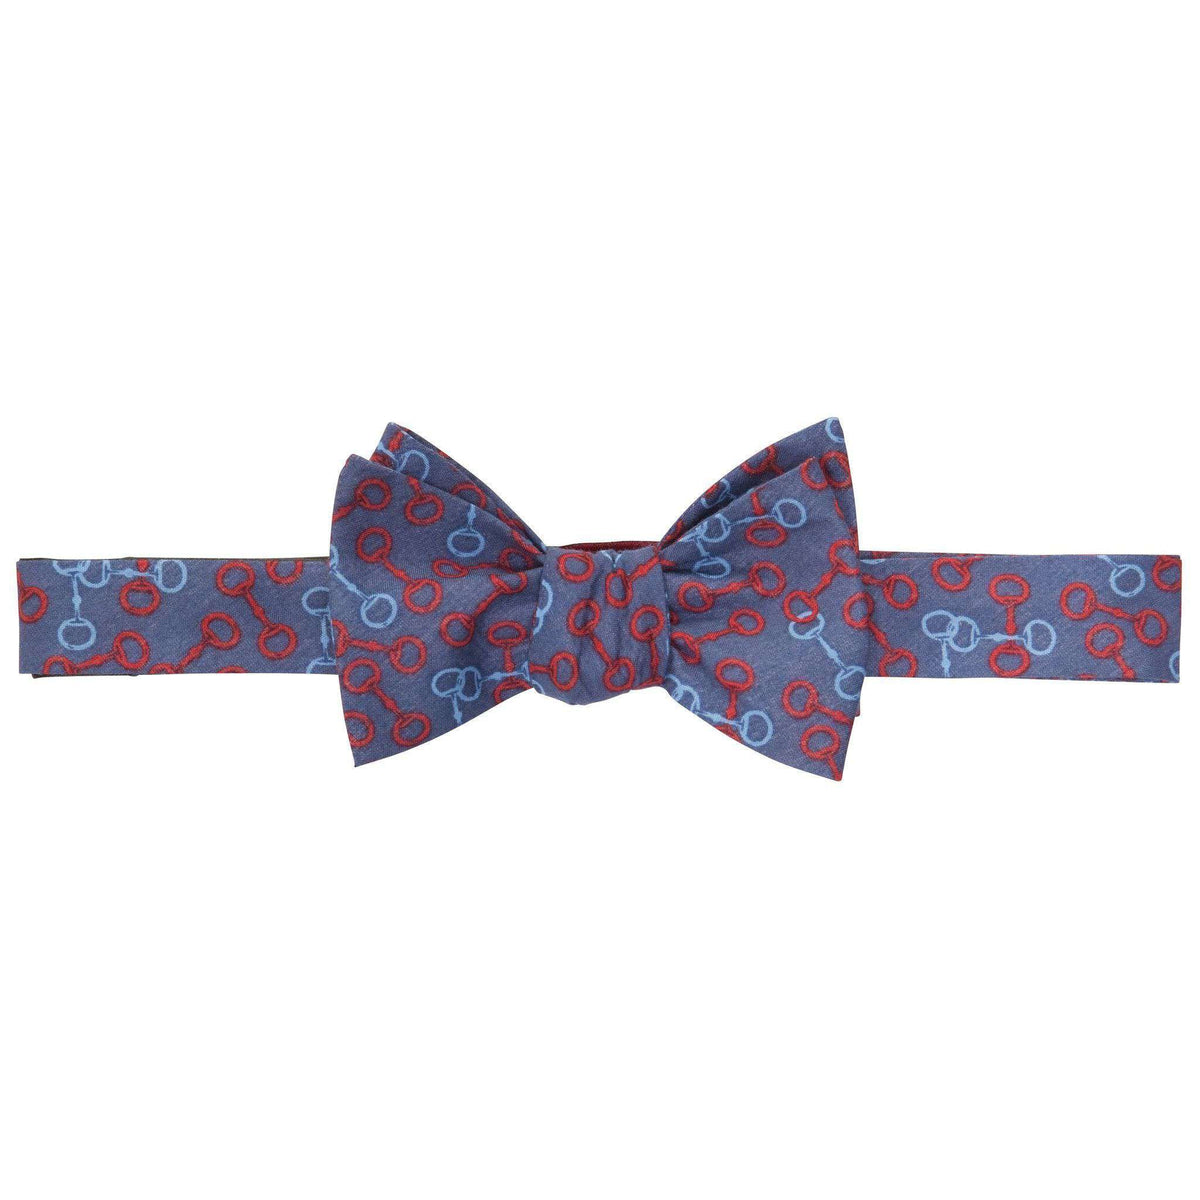 Bit O' Derby Bow Tie in Navy and Red by Southern Proper - Country Club Prep